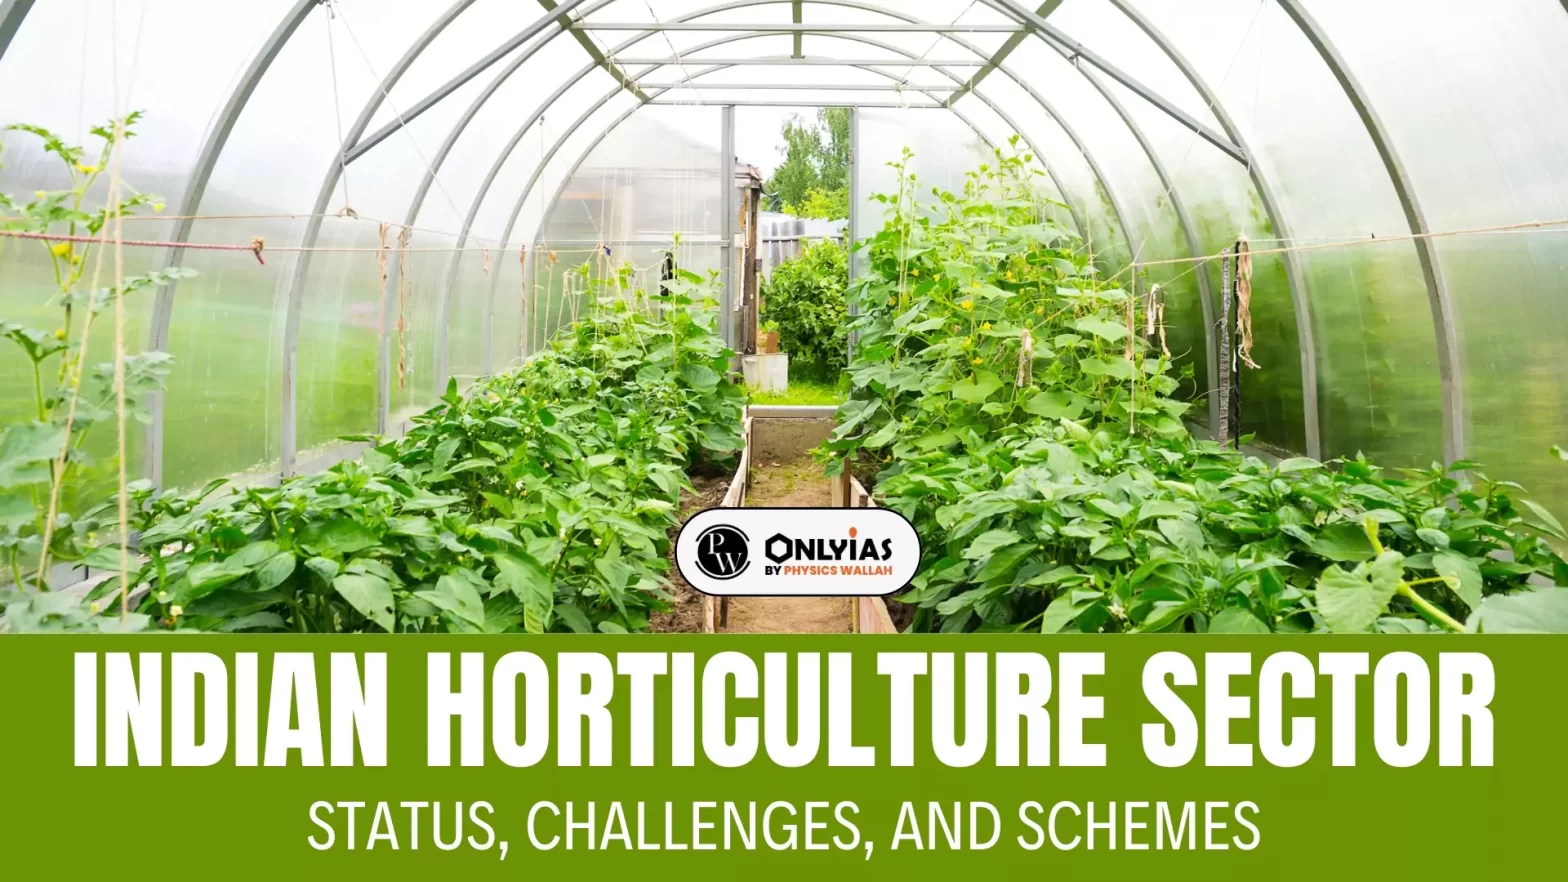 Indian Horticulture Sector: Status, Challenges, and Schemes